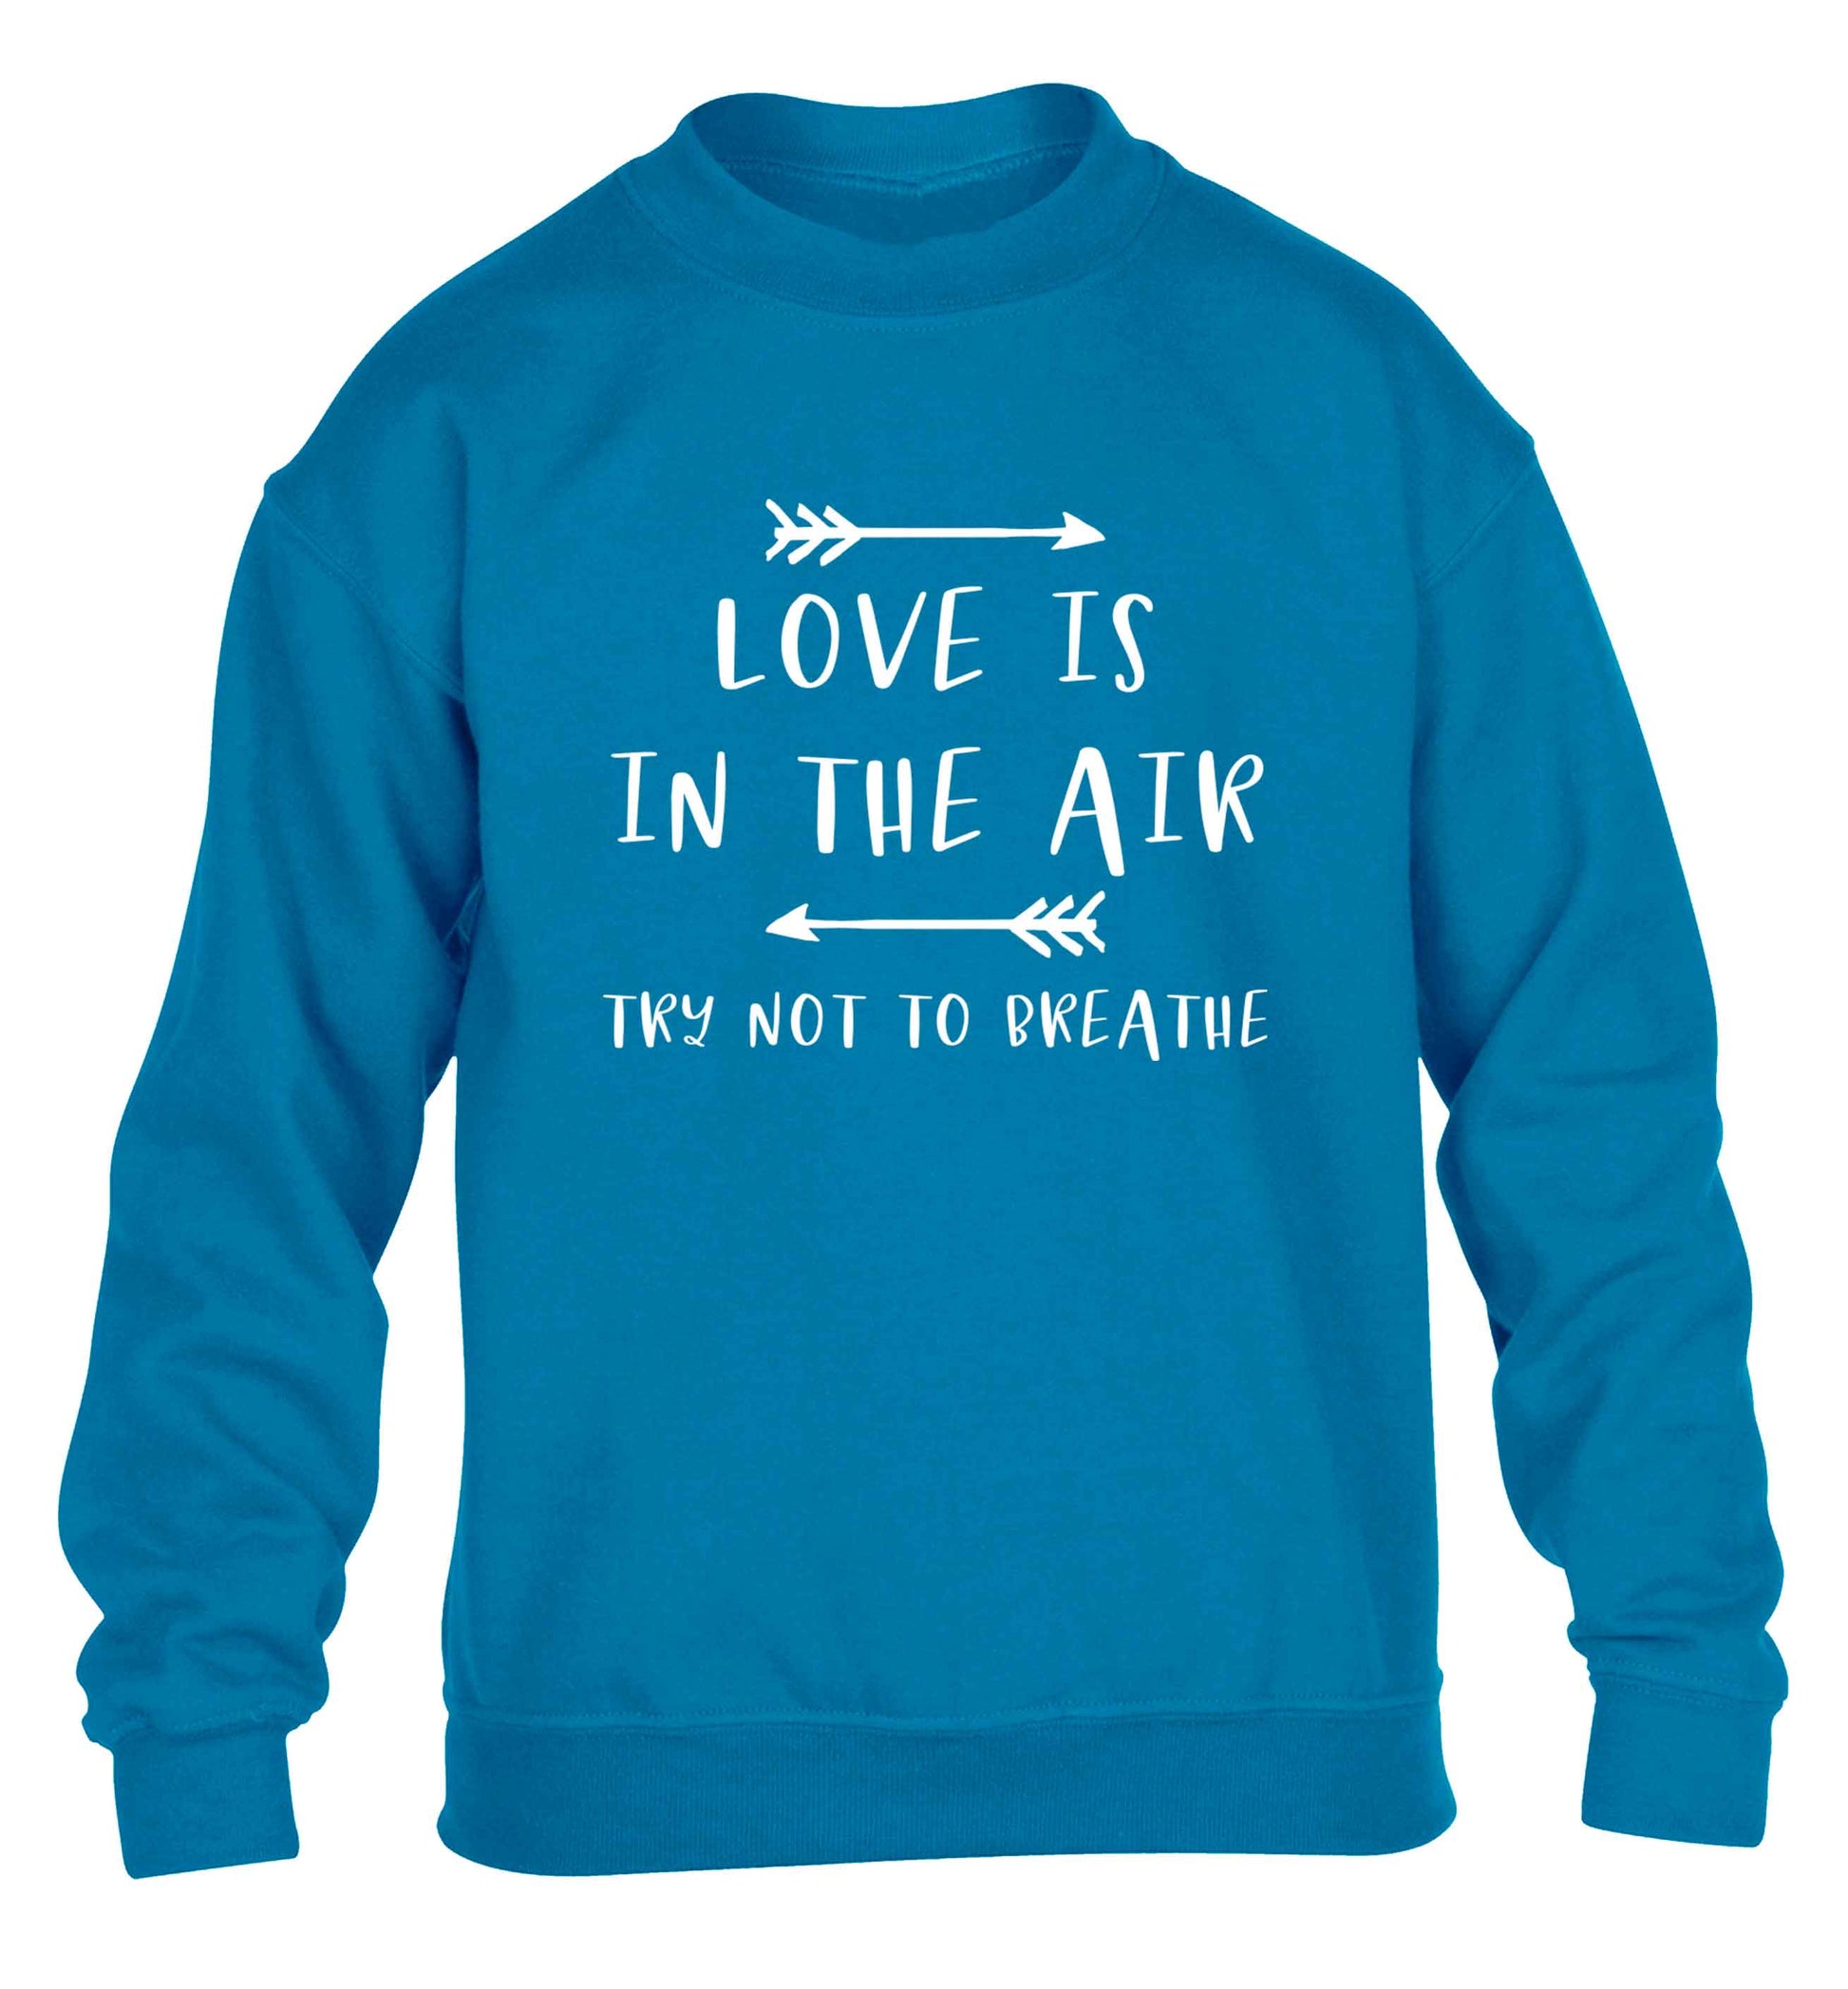 Love is in the air try not to breathe children's blue sweater 12-13 Years